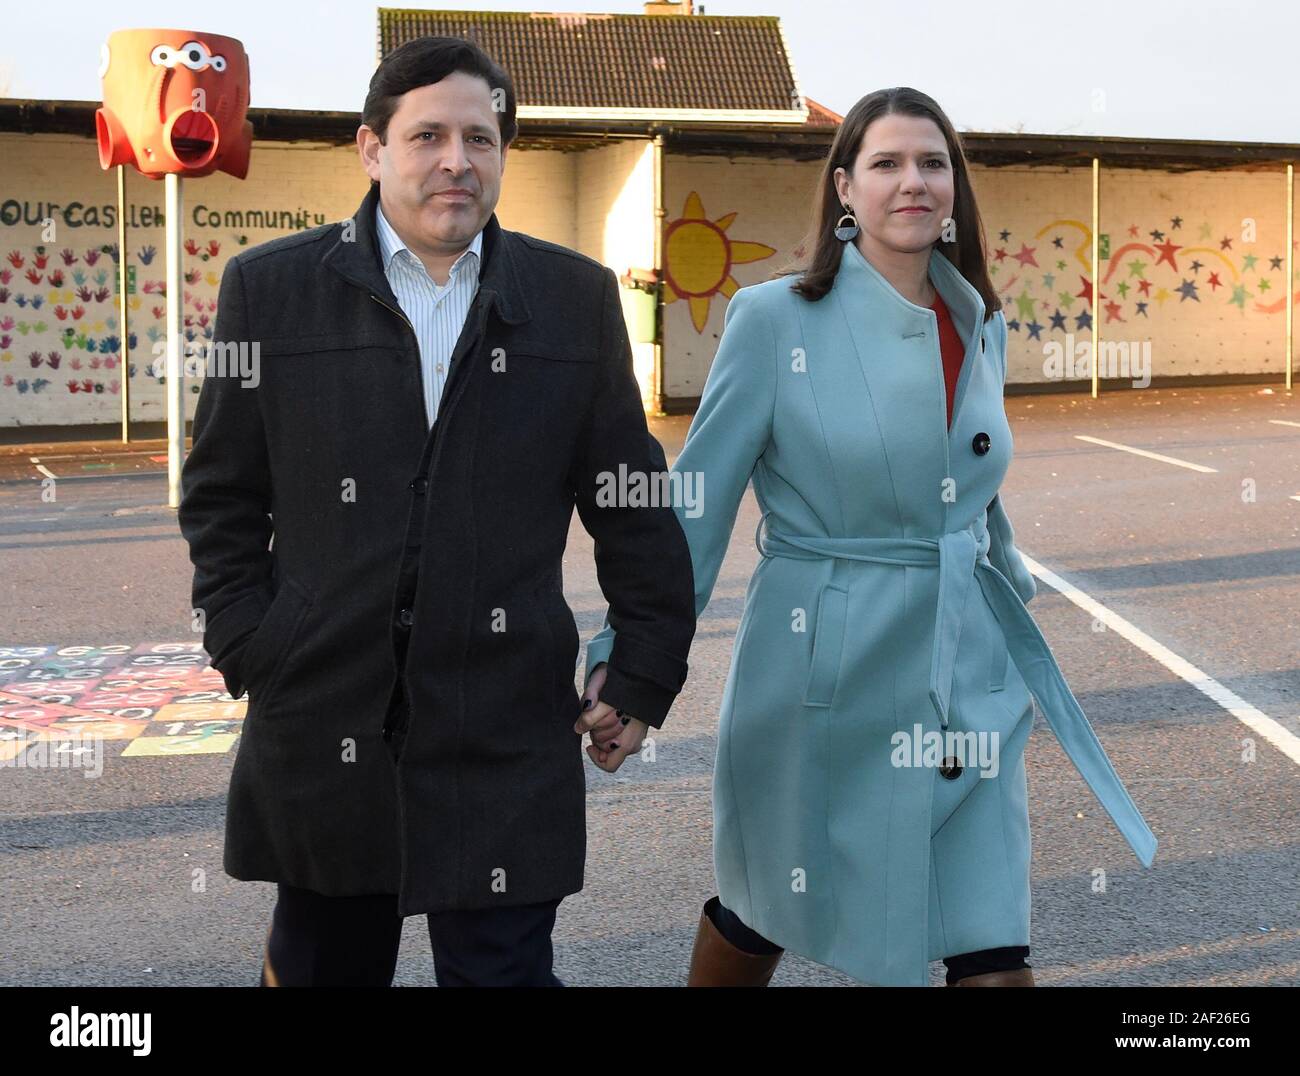 Liberal Democrat leader Jo Swinson and her partner Duncan Hames arrive to cast their votes in the 2019 General Election at Castlehill Primary School in Glasgow. Stock Photo